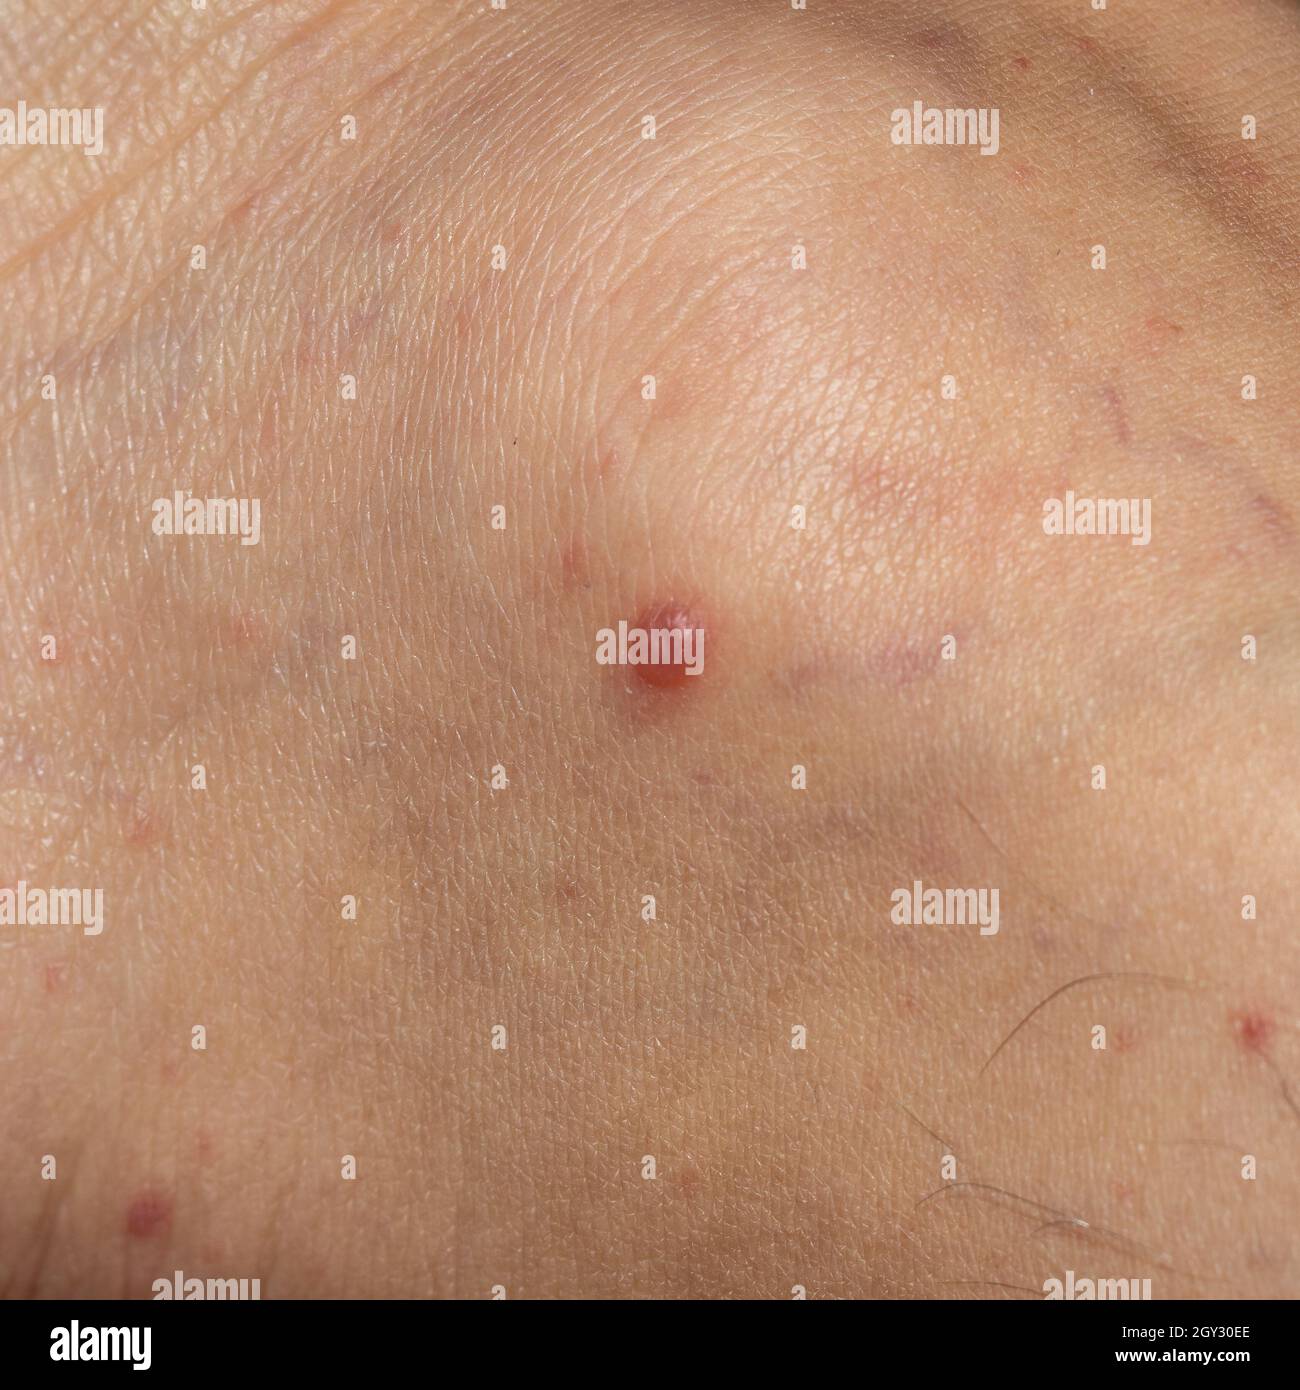 scarlet fever in adult caucasian man Stock Photo